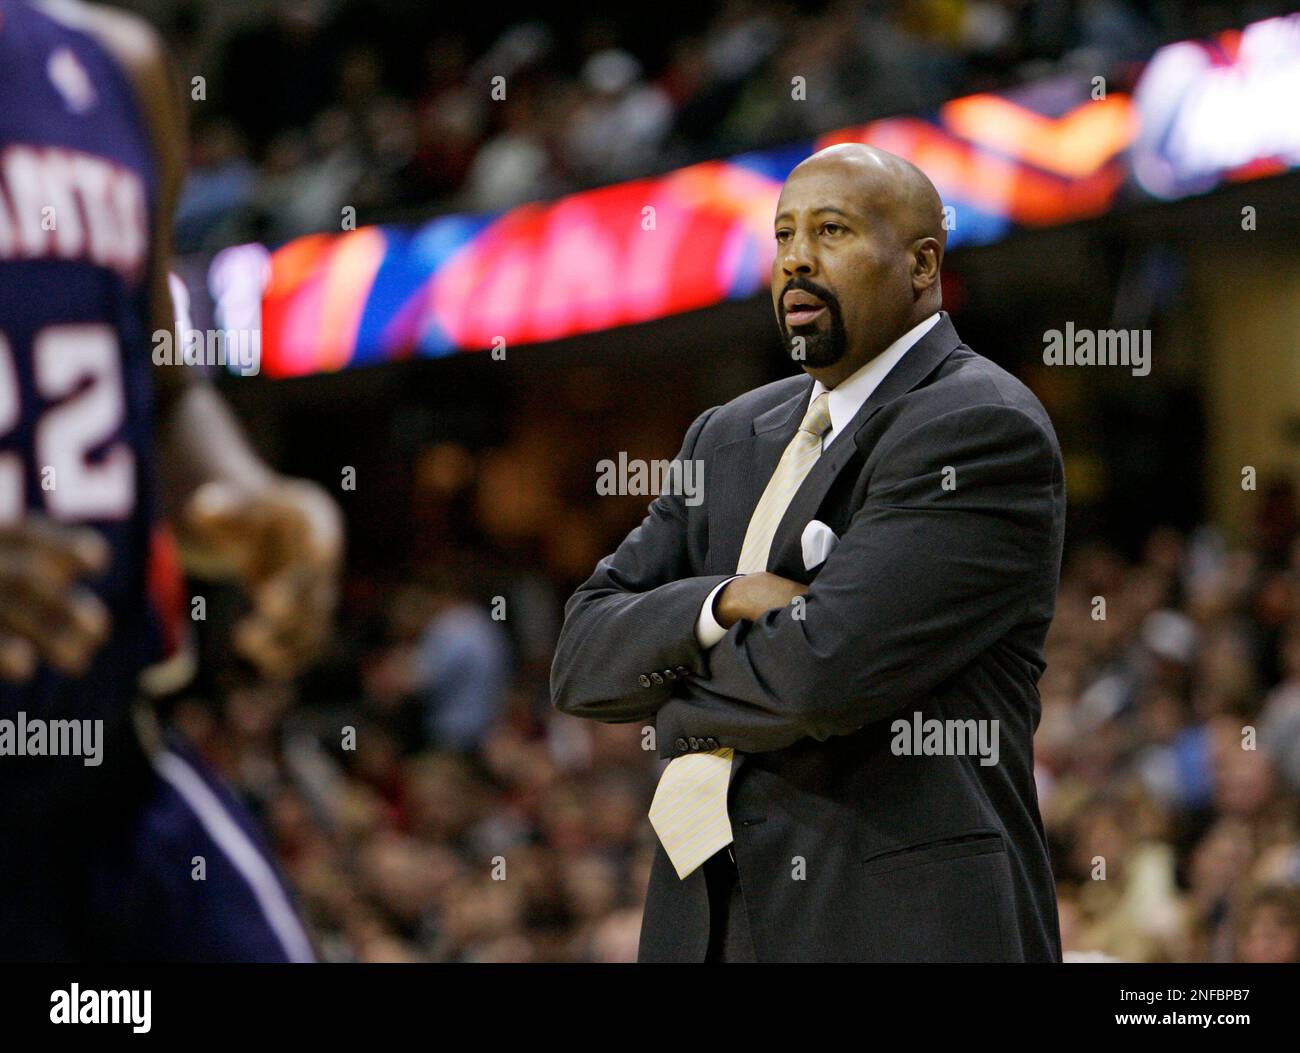 Atlanta Hawks coach Mike Woodson watches from the bench during an NBA basketball game against the Cleveland Cavaliers Saturday, Nov. 22, 2008, in Cleveland. (AP Photo/Mark Duncan) Stock Photo